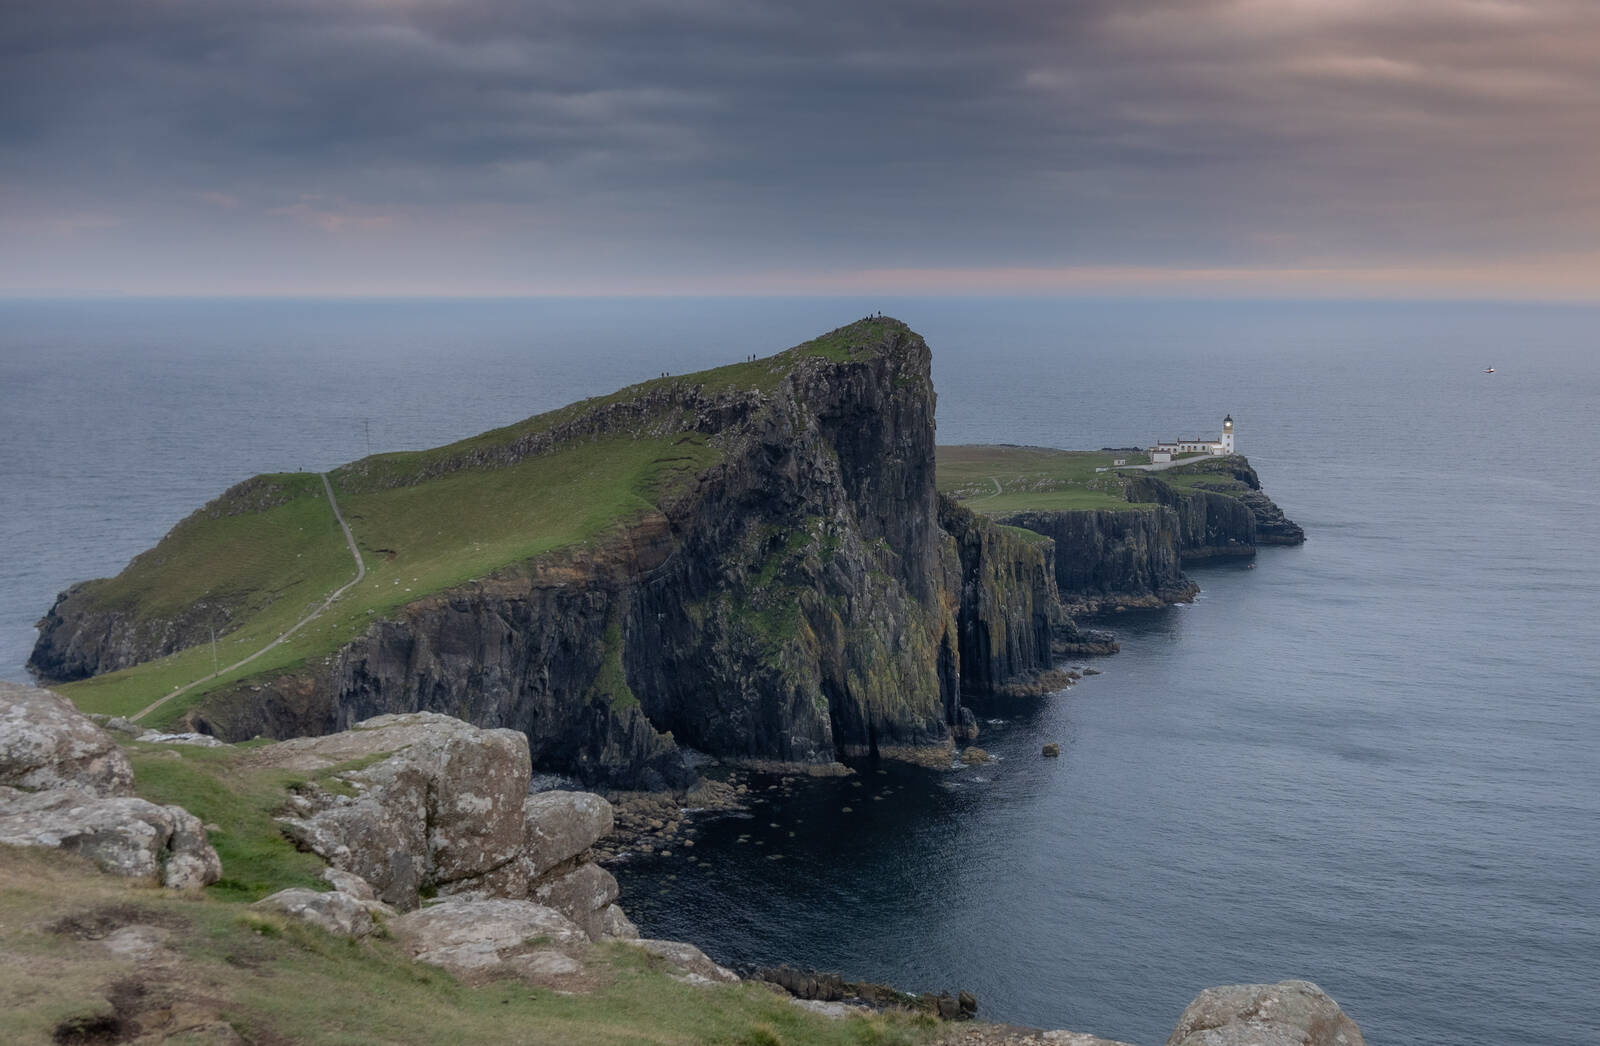 Image of Neist Point by Paul Gaskell